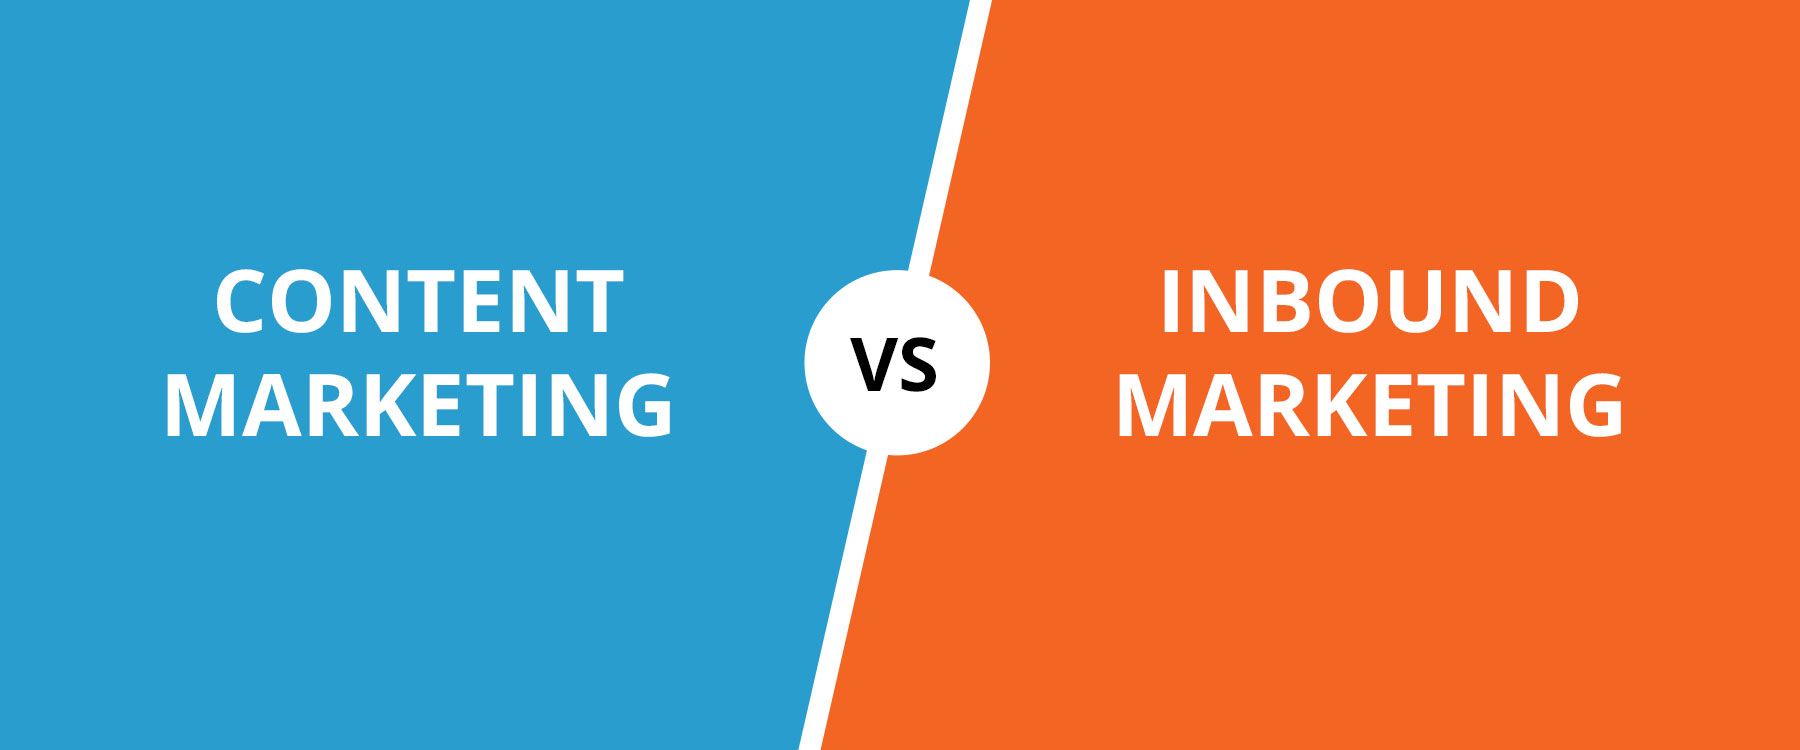 Content Marketing vs. Inbound Marketing – Can They Be Compared?